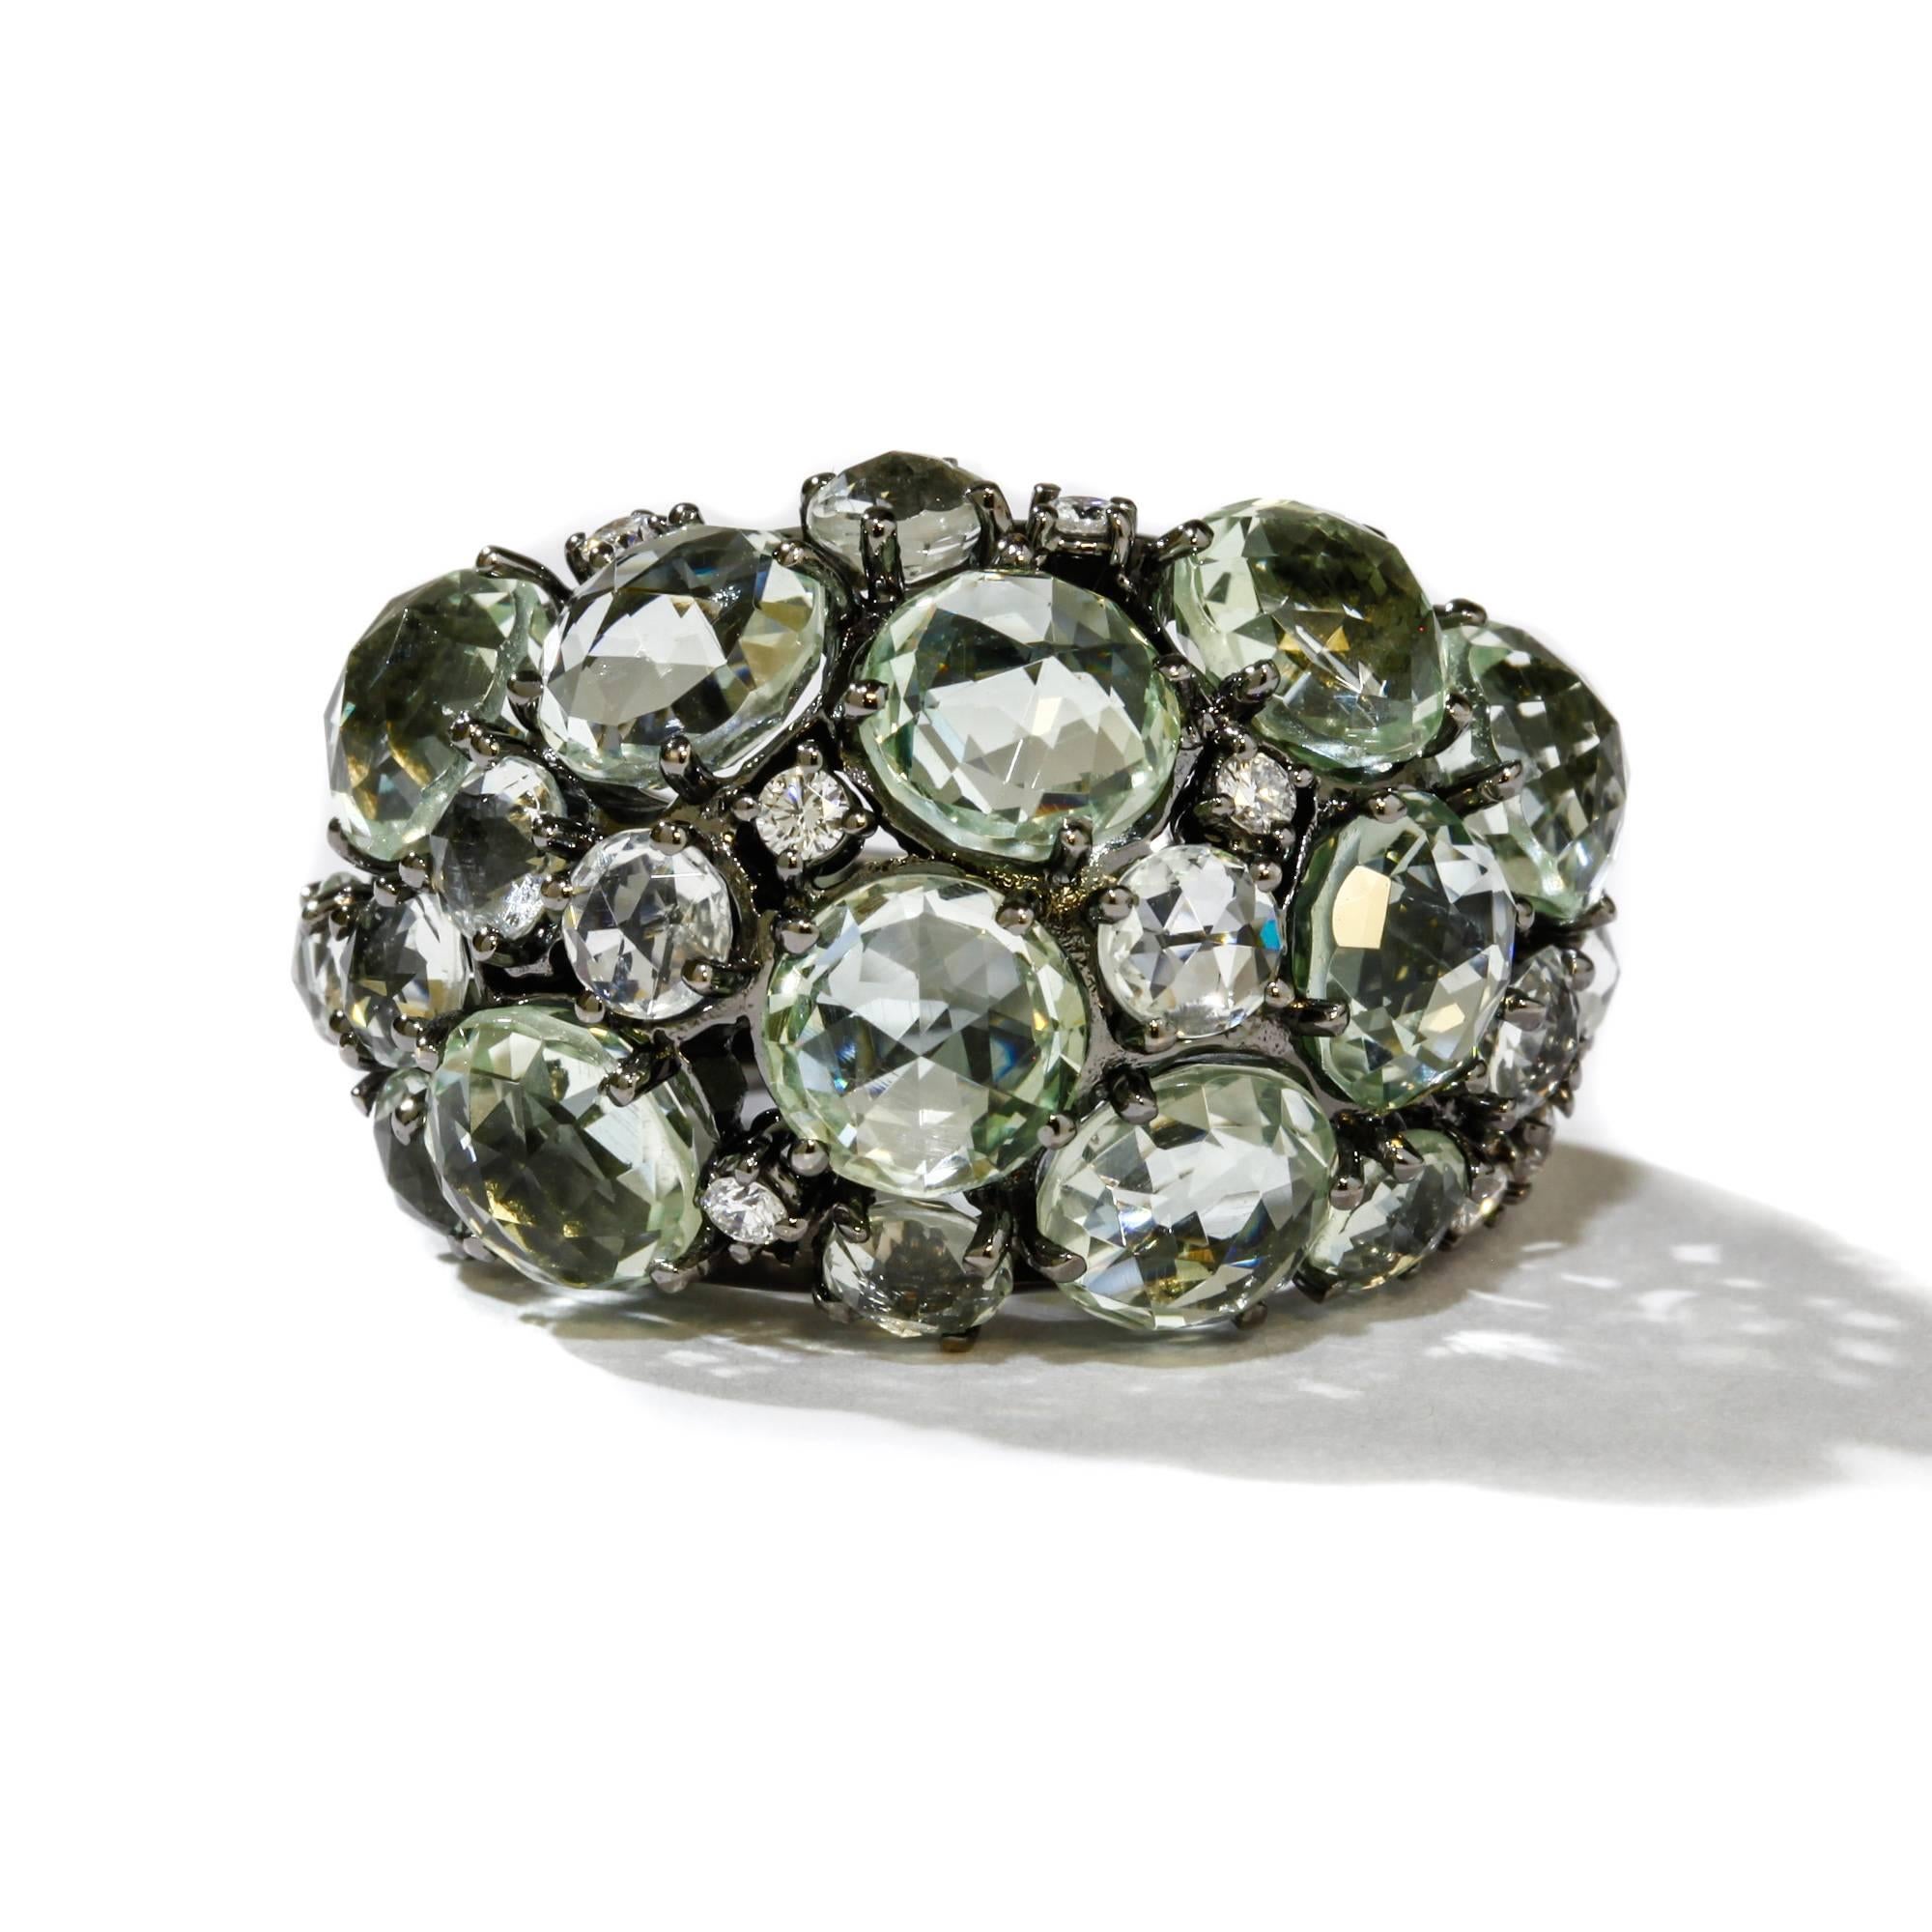 This A & Furst dome ring features 15.00 ct. of rose cut prasiolites (green quartz) and 0.22 ct. round diamonds set in 18k black gold. It is a size 7.5. Light scratches on outside bottom of shank (see photos). A & Furst jewelry is designed in Napa